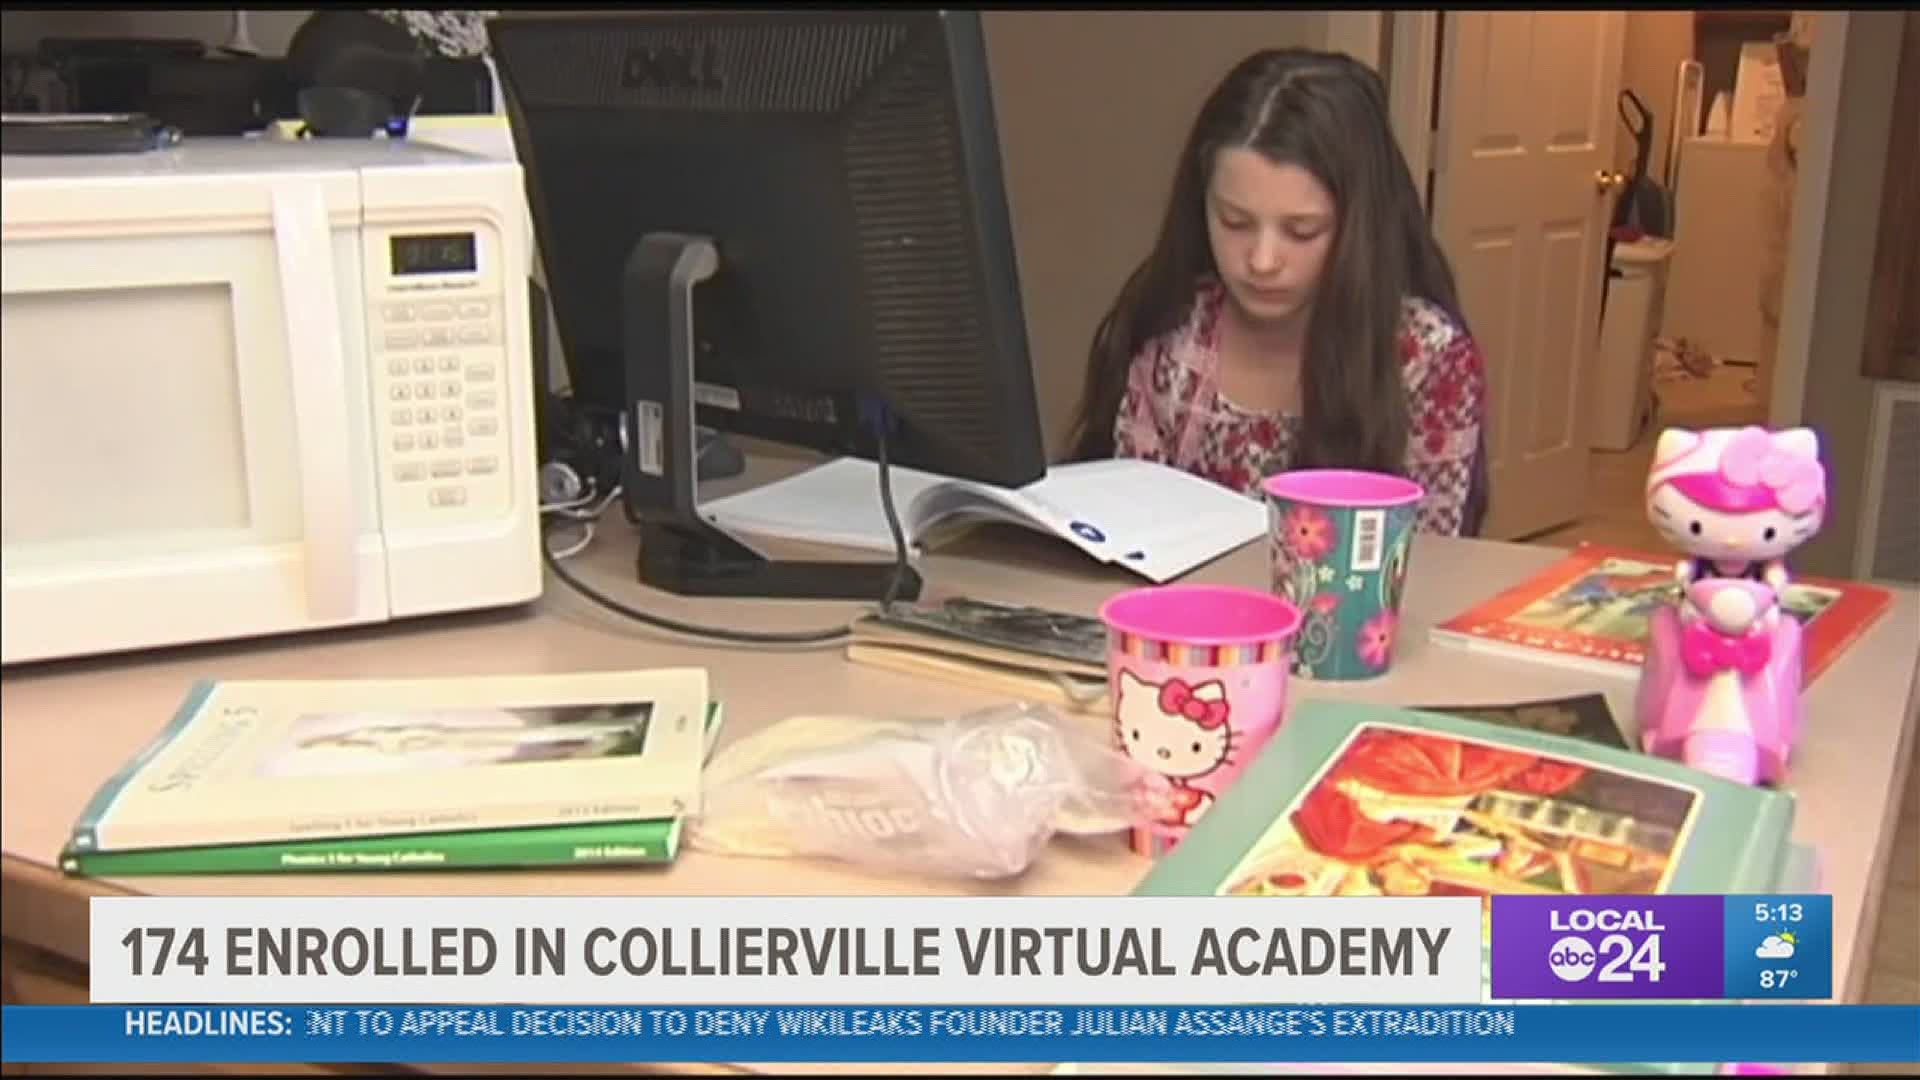 So far at least 174 students from 3rd to 12th grades in the Collierville Schools district have signed up to learn full-time from home this school year.